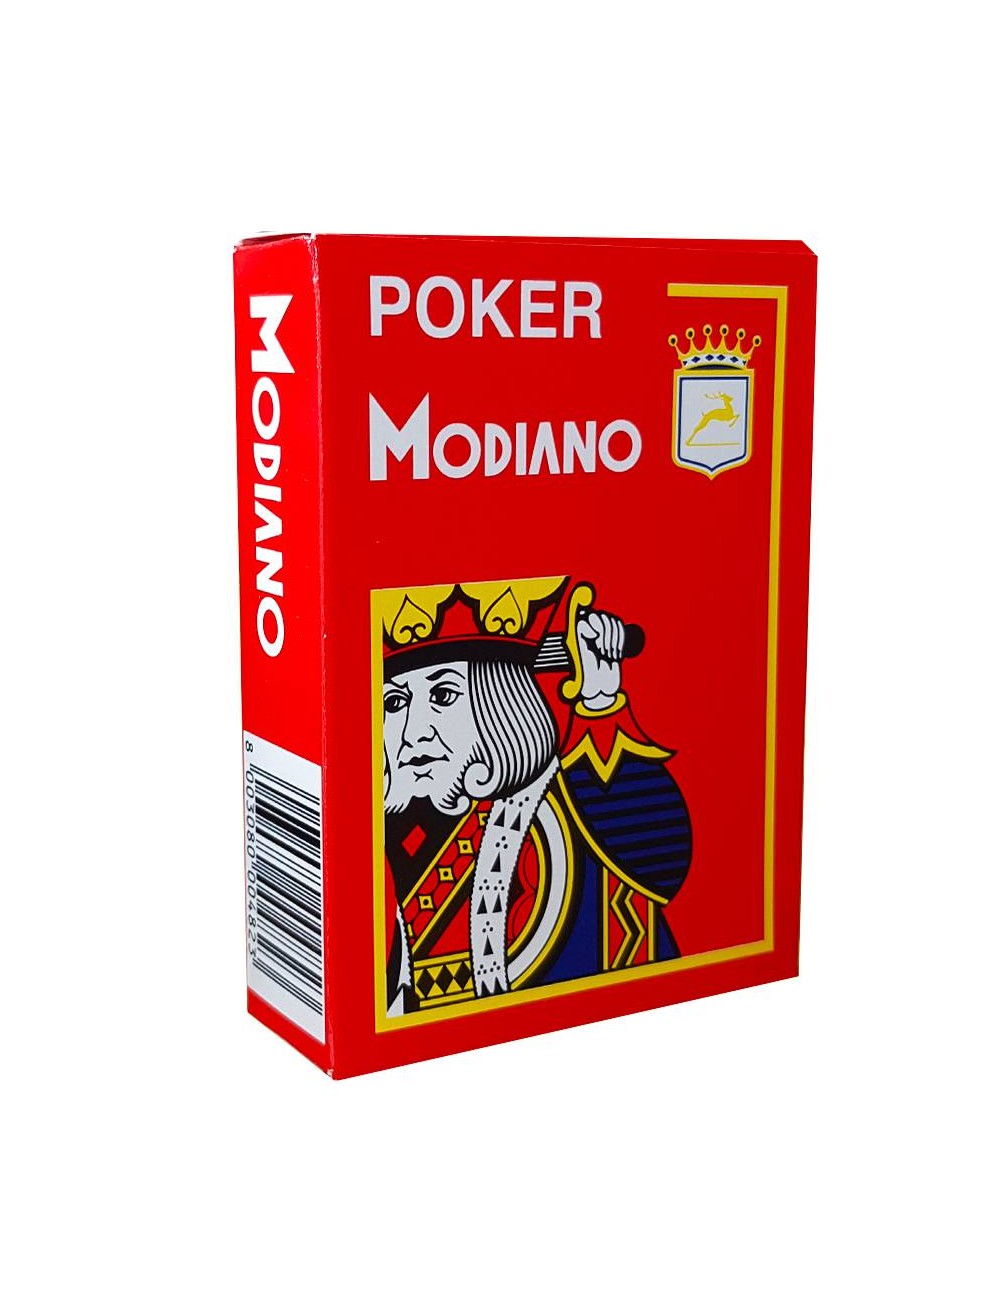 Modiano "CRISTALLO RED" - 55-card deck made of 100% plastic - poker size - 4 jumbo indexes.